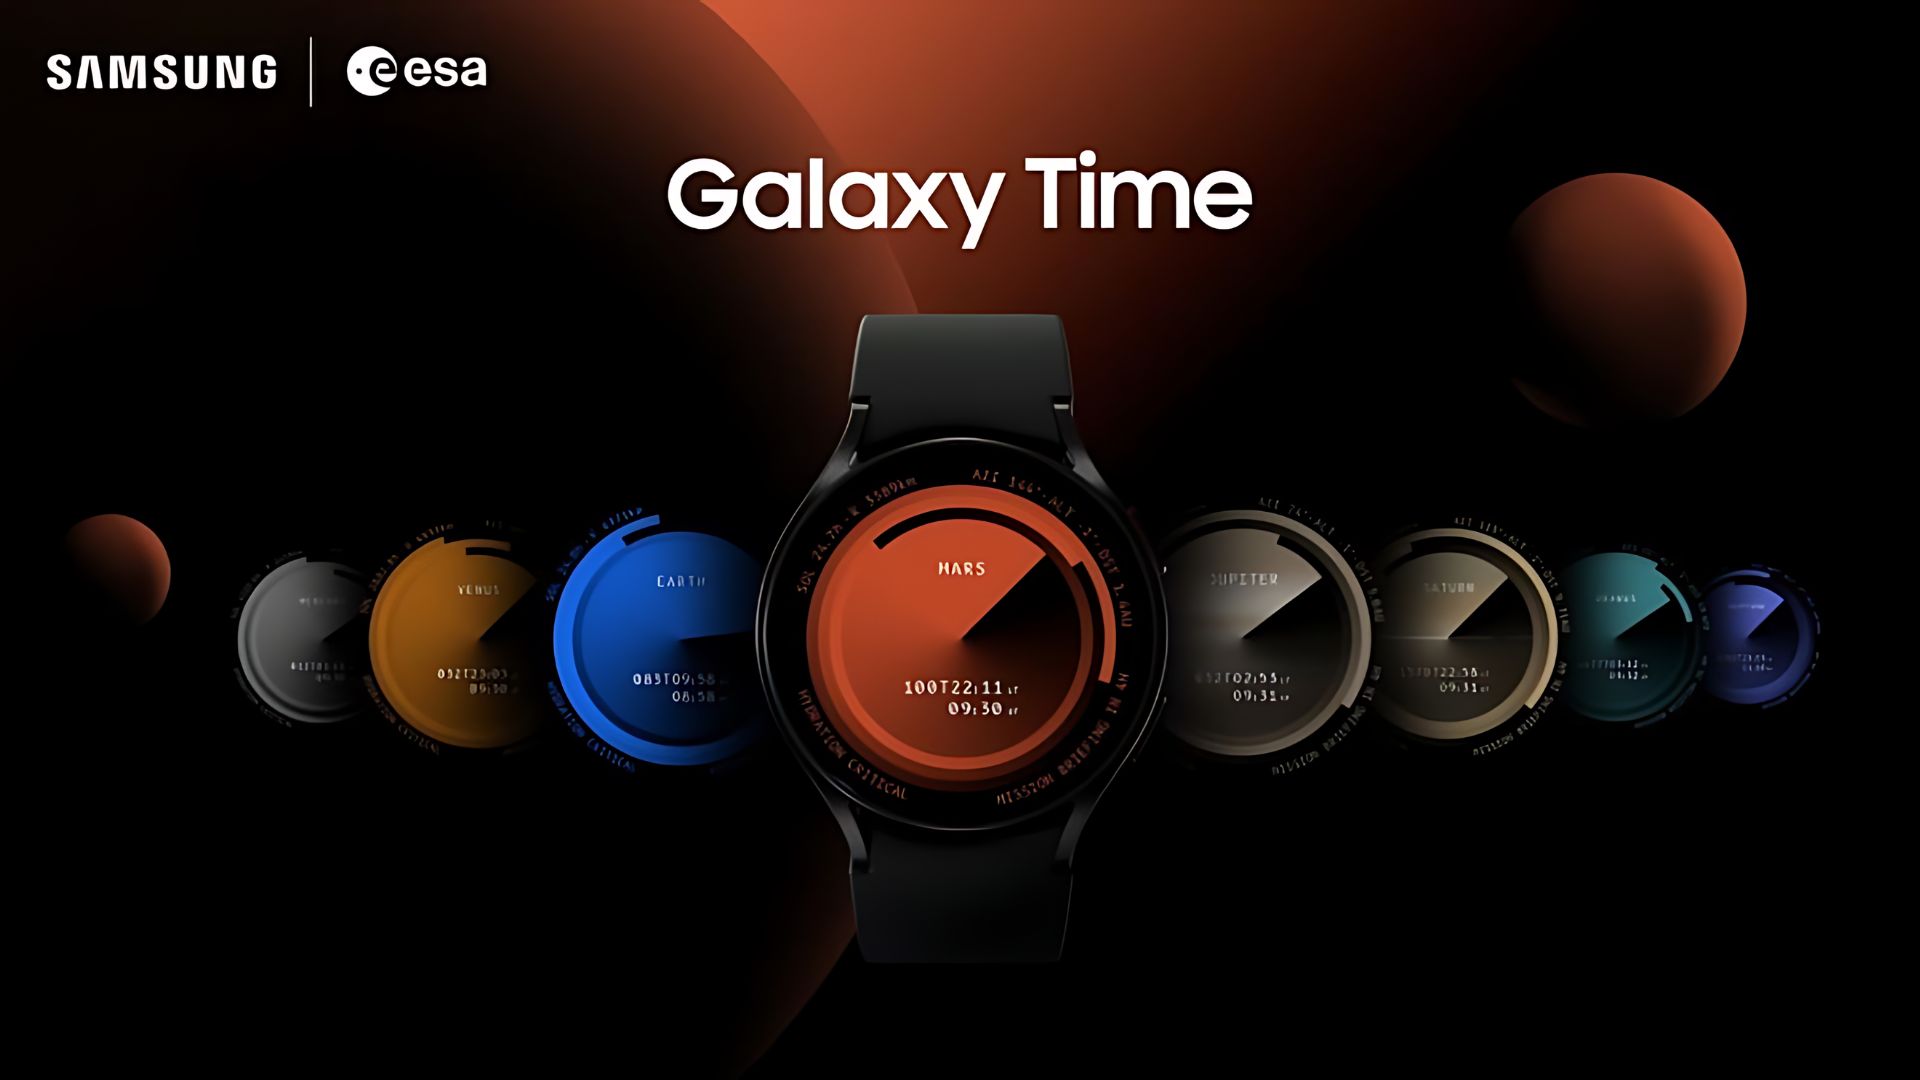 Samsung Collaborates with ESA to Launch Galaxy Time Watch Faces Displaying Real-Time Planetary Data